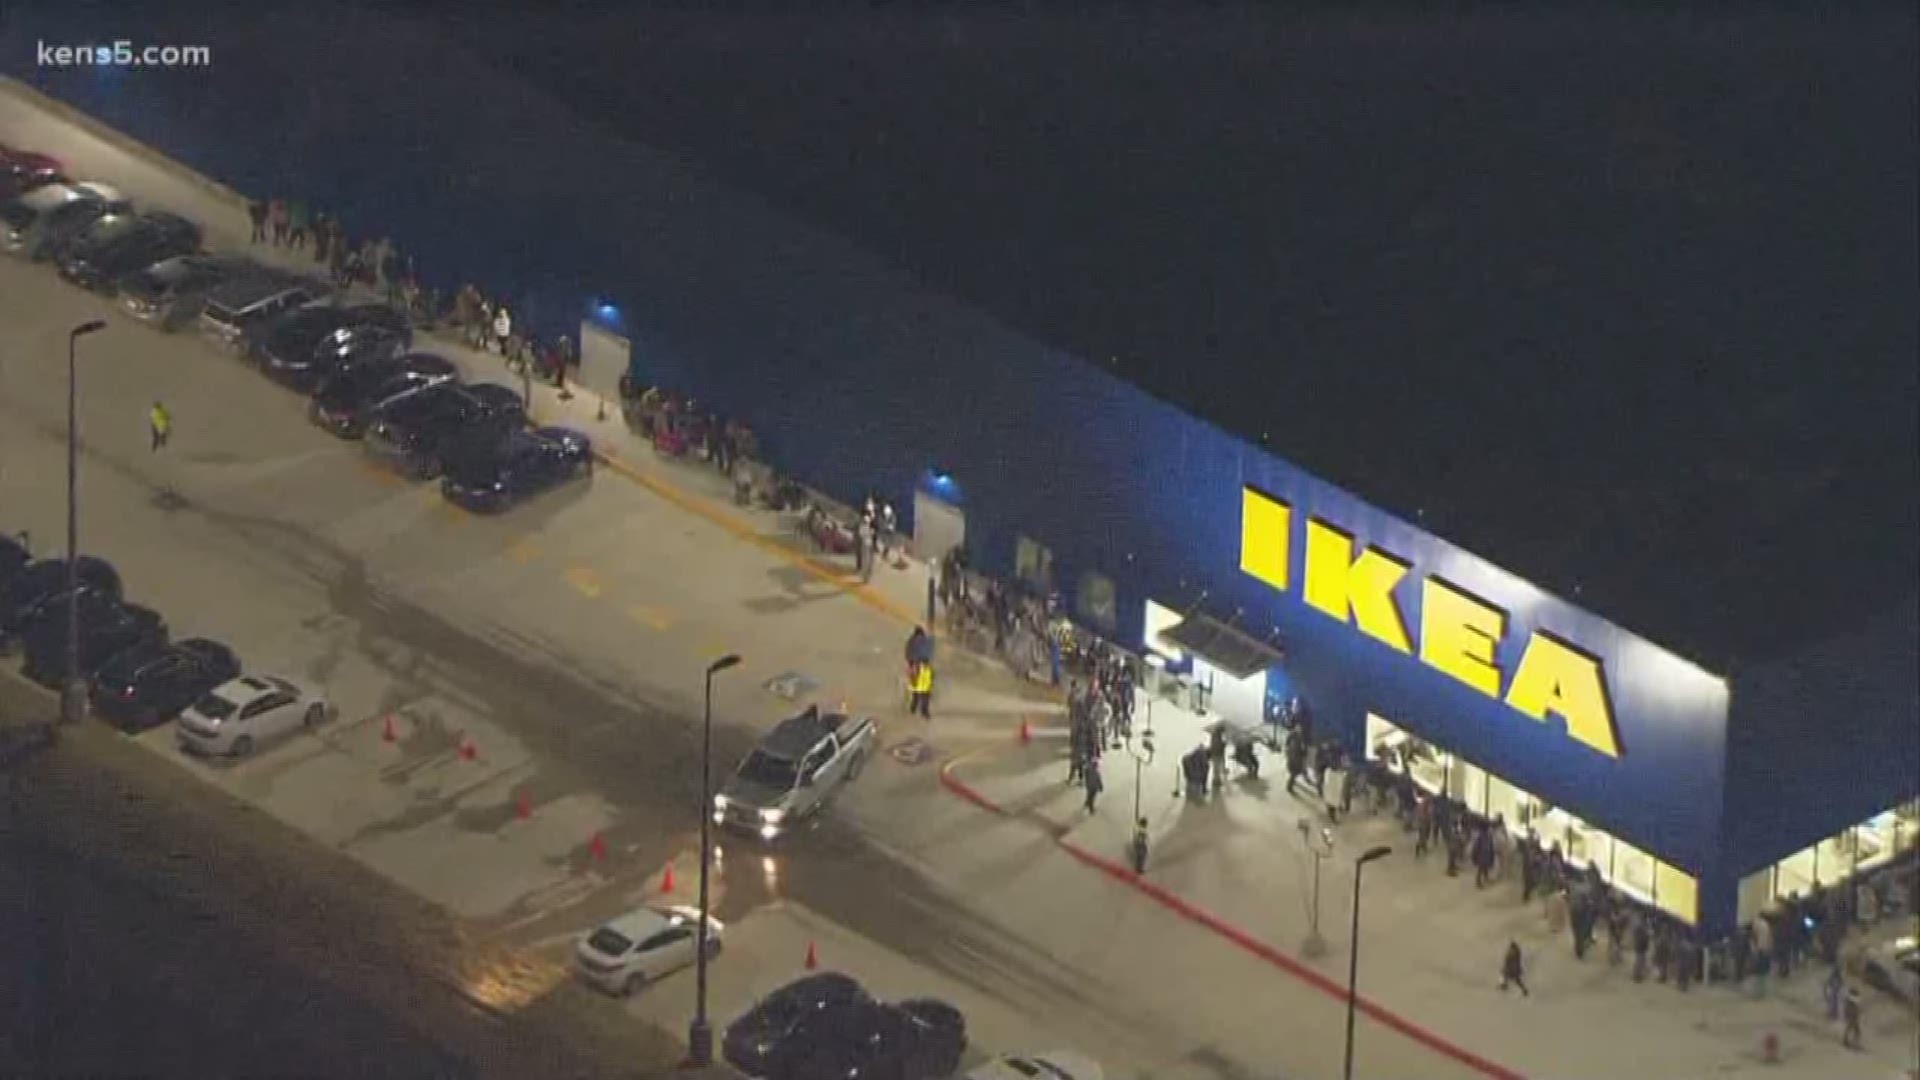 IKEA Live Oak officially opens its doors Wednesday! The store says it's "returning the favor" to the community who has welcomed the Swedish furniture giant to South Texas with an extravagant grand opening celebration.